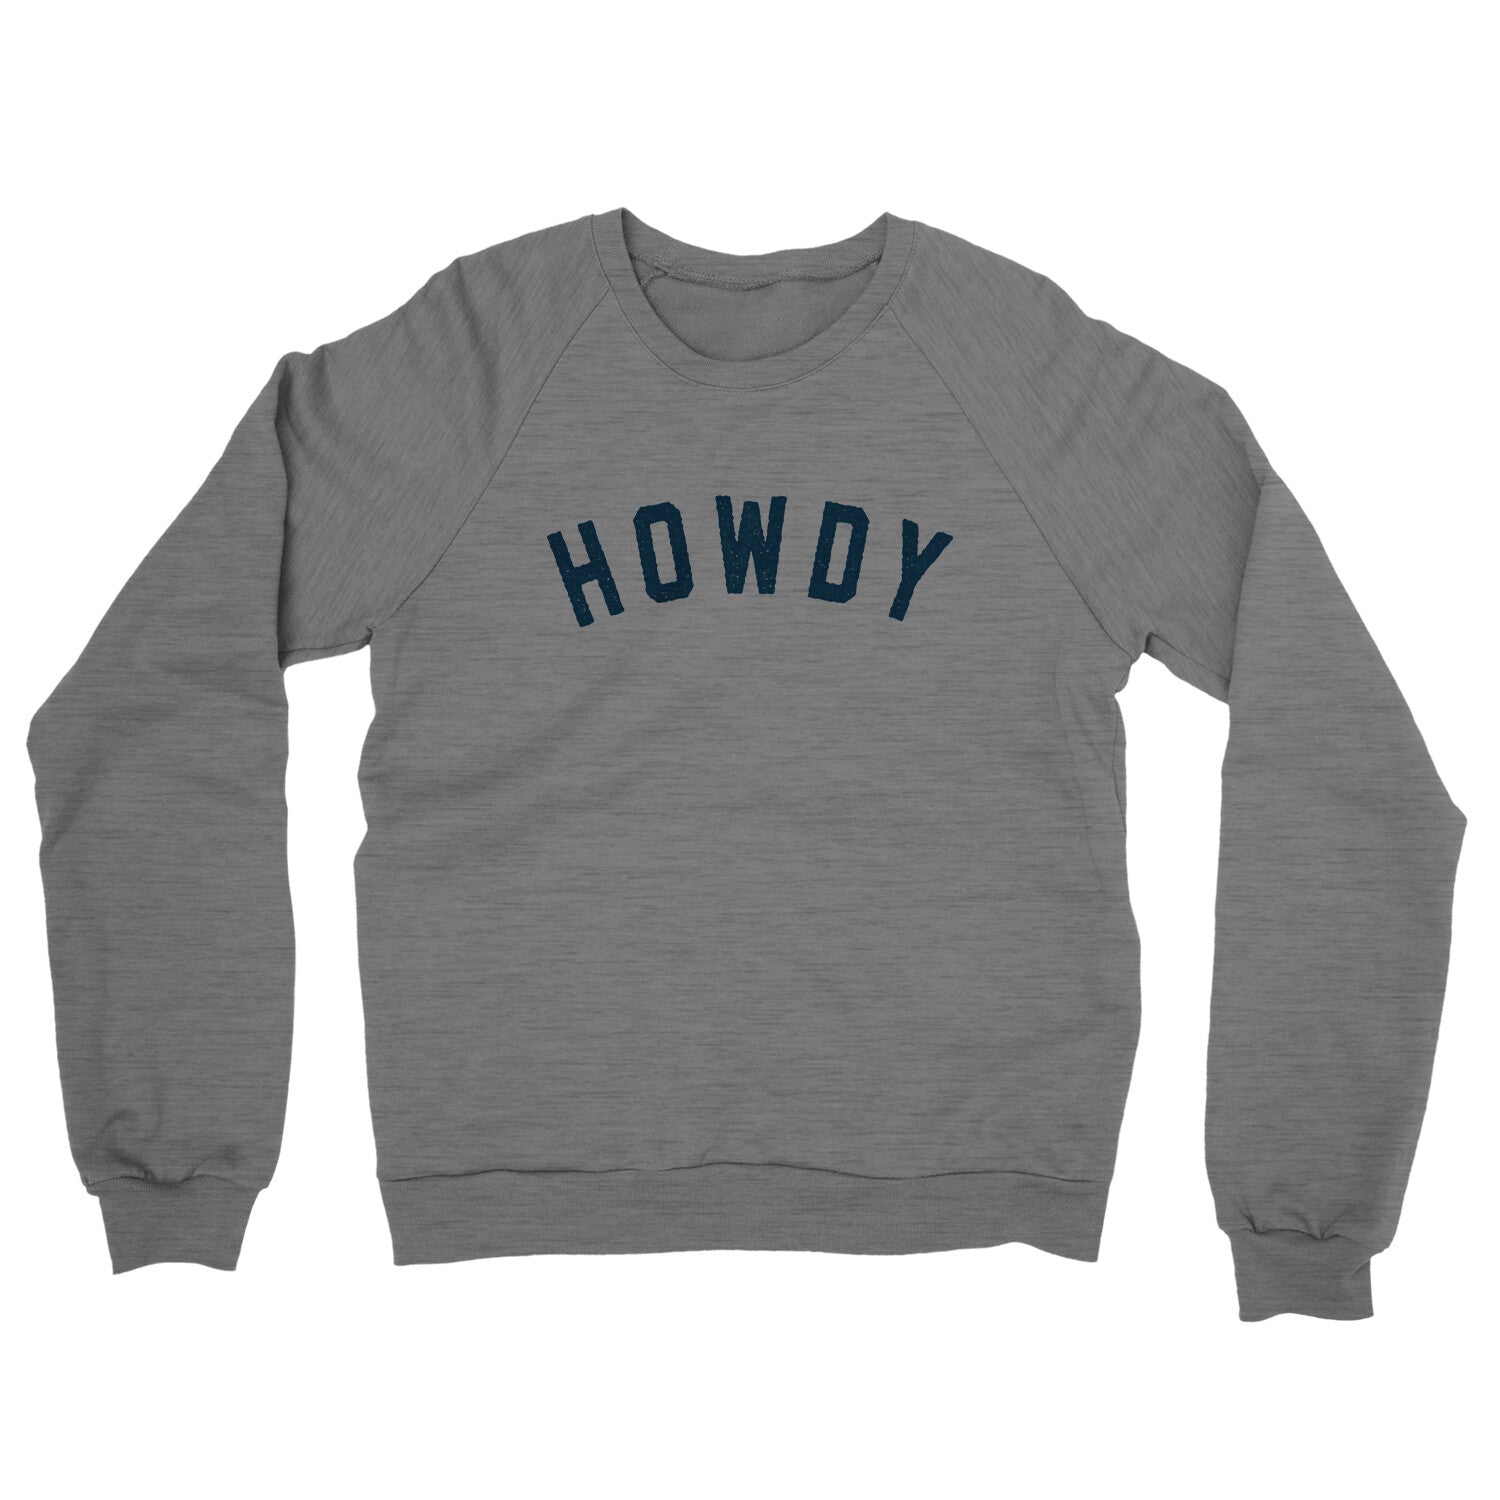 Howdy in Graphite Heather Color